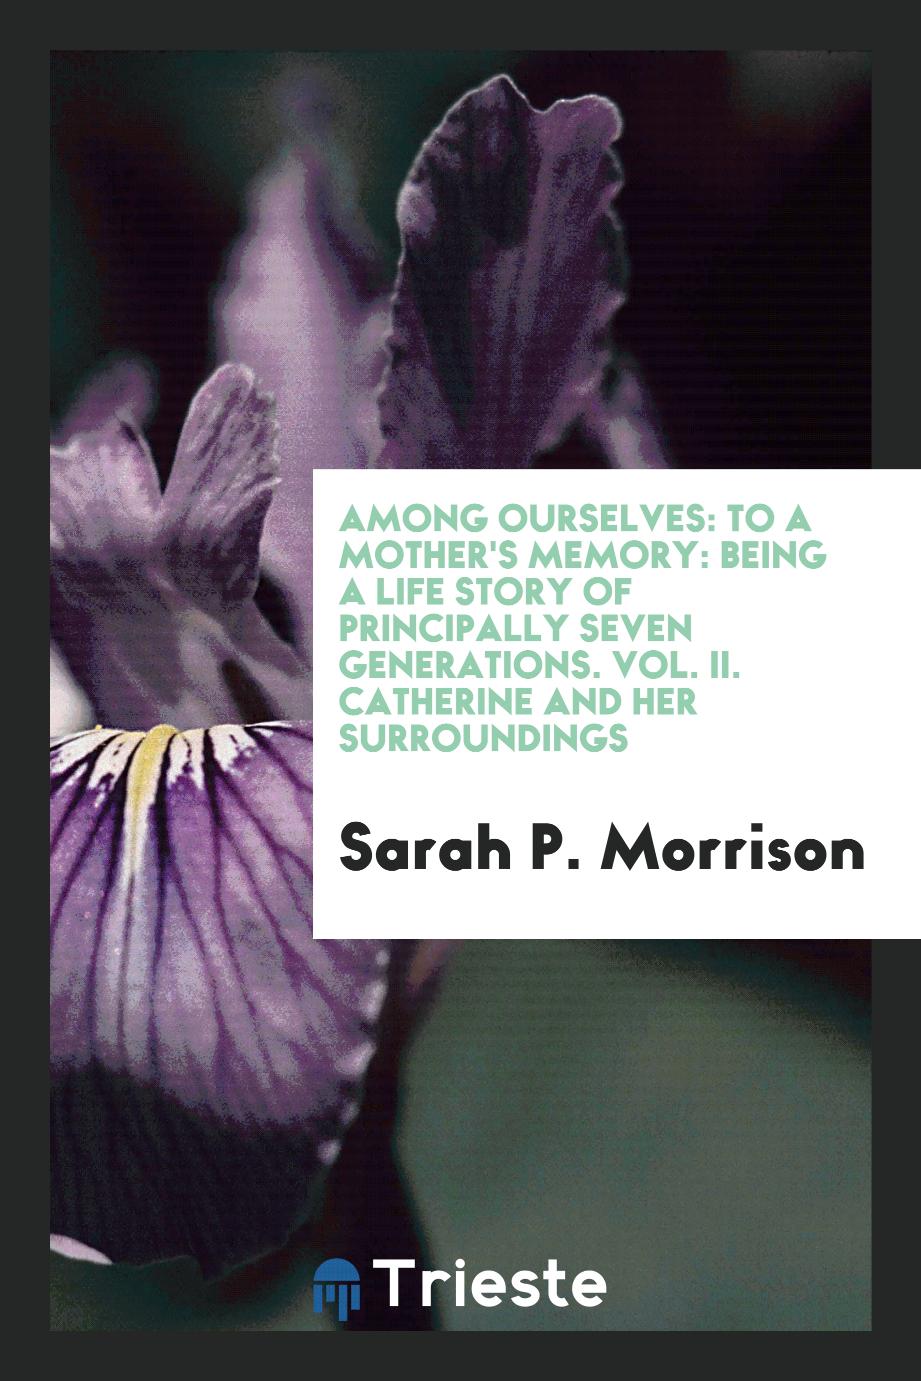 Among Ourselves: To a Mother's Memory: Being a Life Story of Principally Seven Generations. Vol. II. Catherine and Her Surroundings